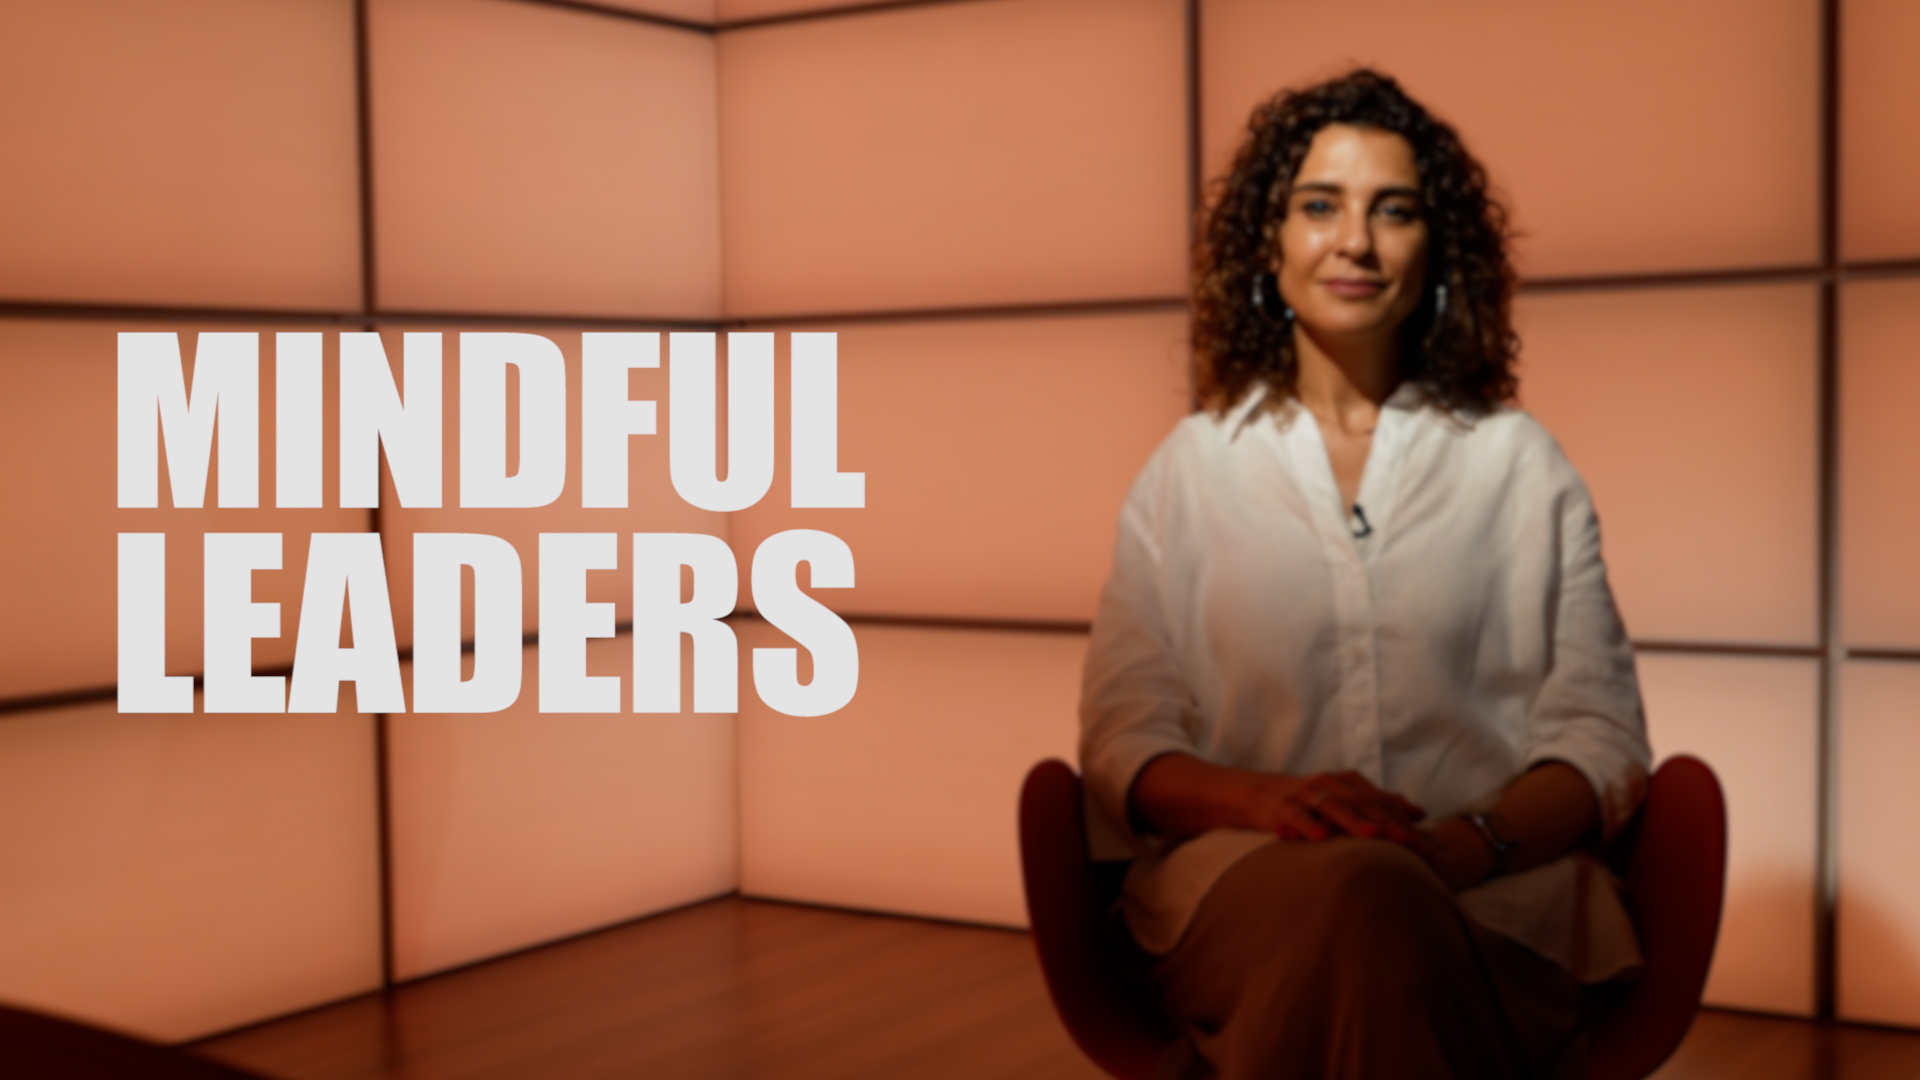 Welcome back to a new season of Mindful Leaders